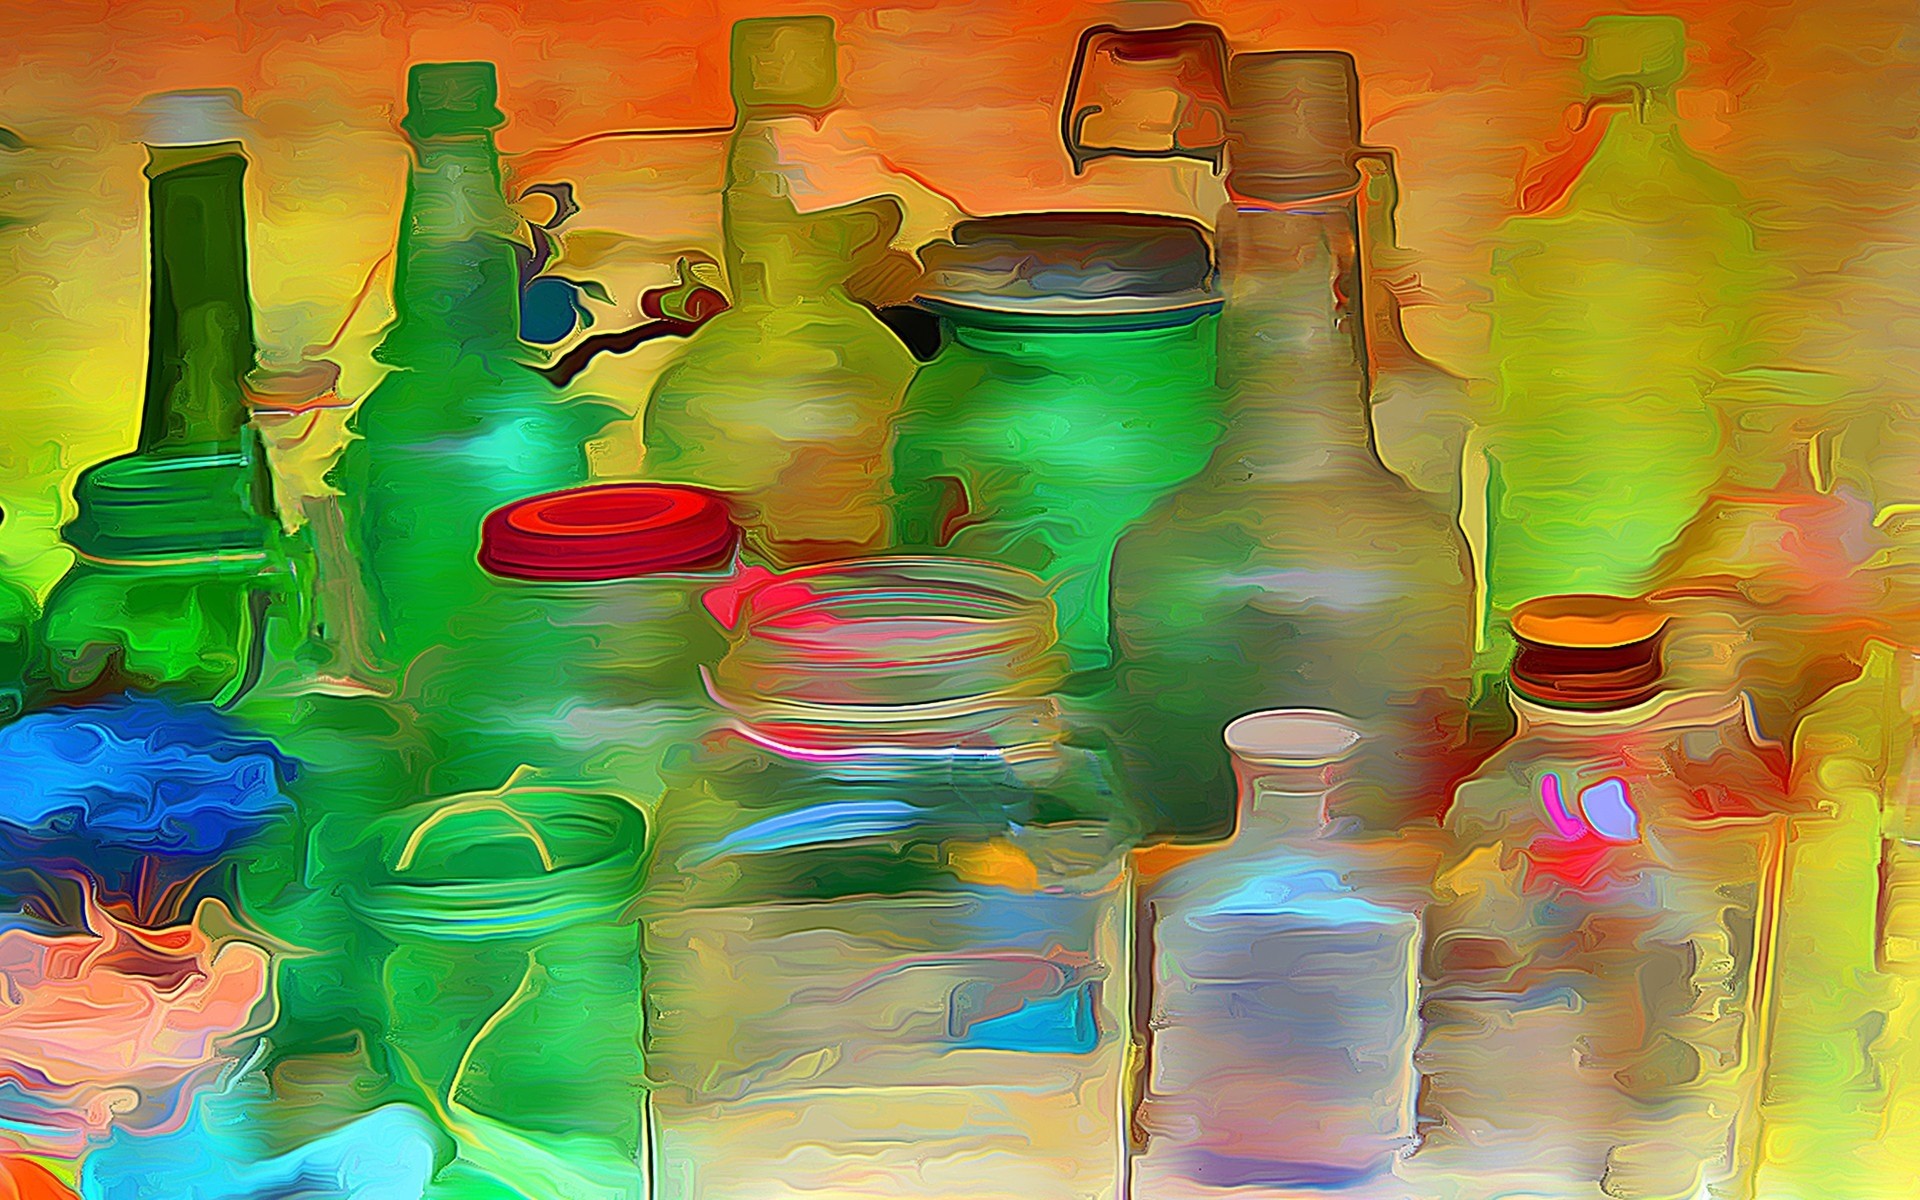 drawings container bottle plastic glass art empty color motley design jars bottles paintings cool